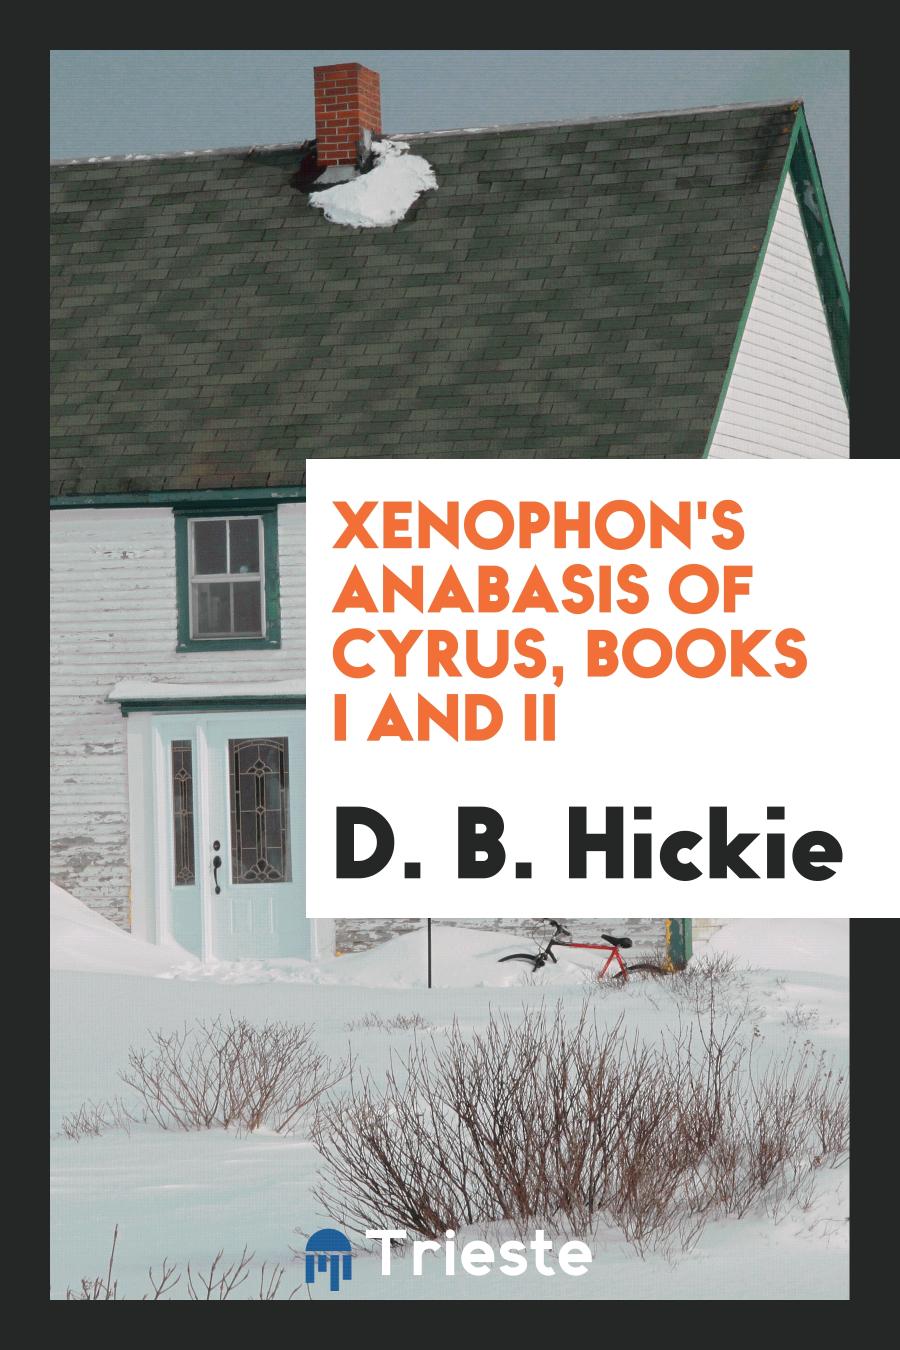 Xenophon's Anabasis of Cyrus, Books I And II